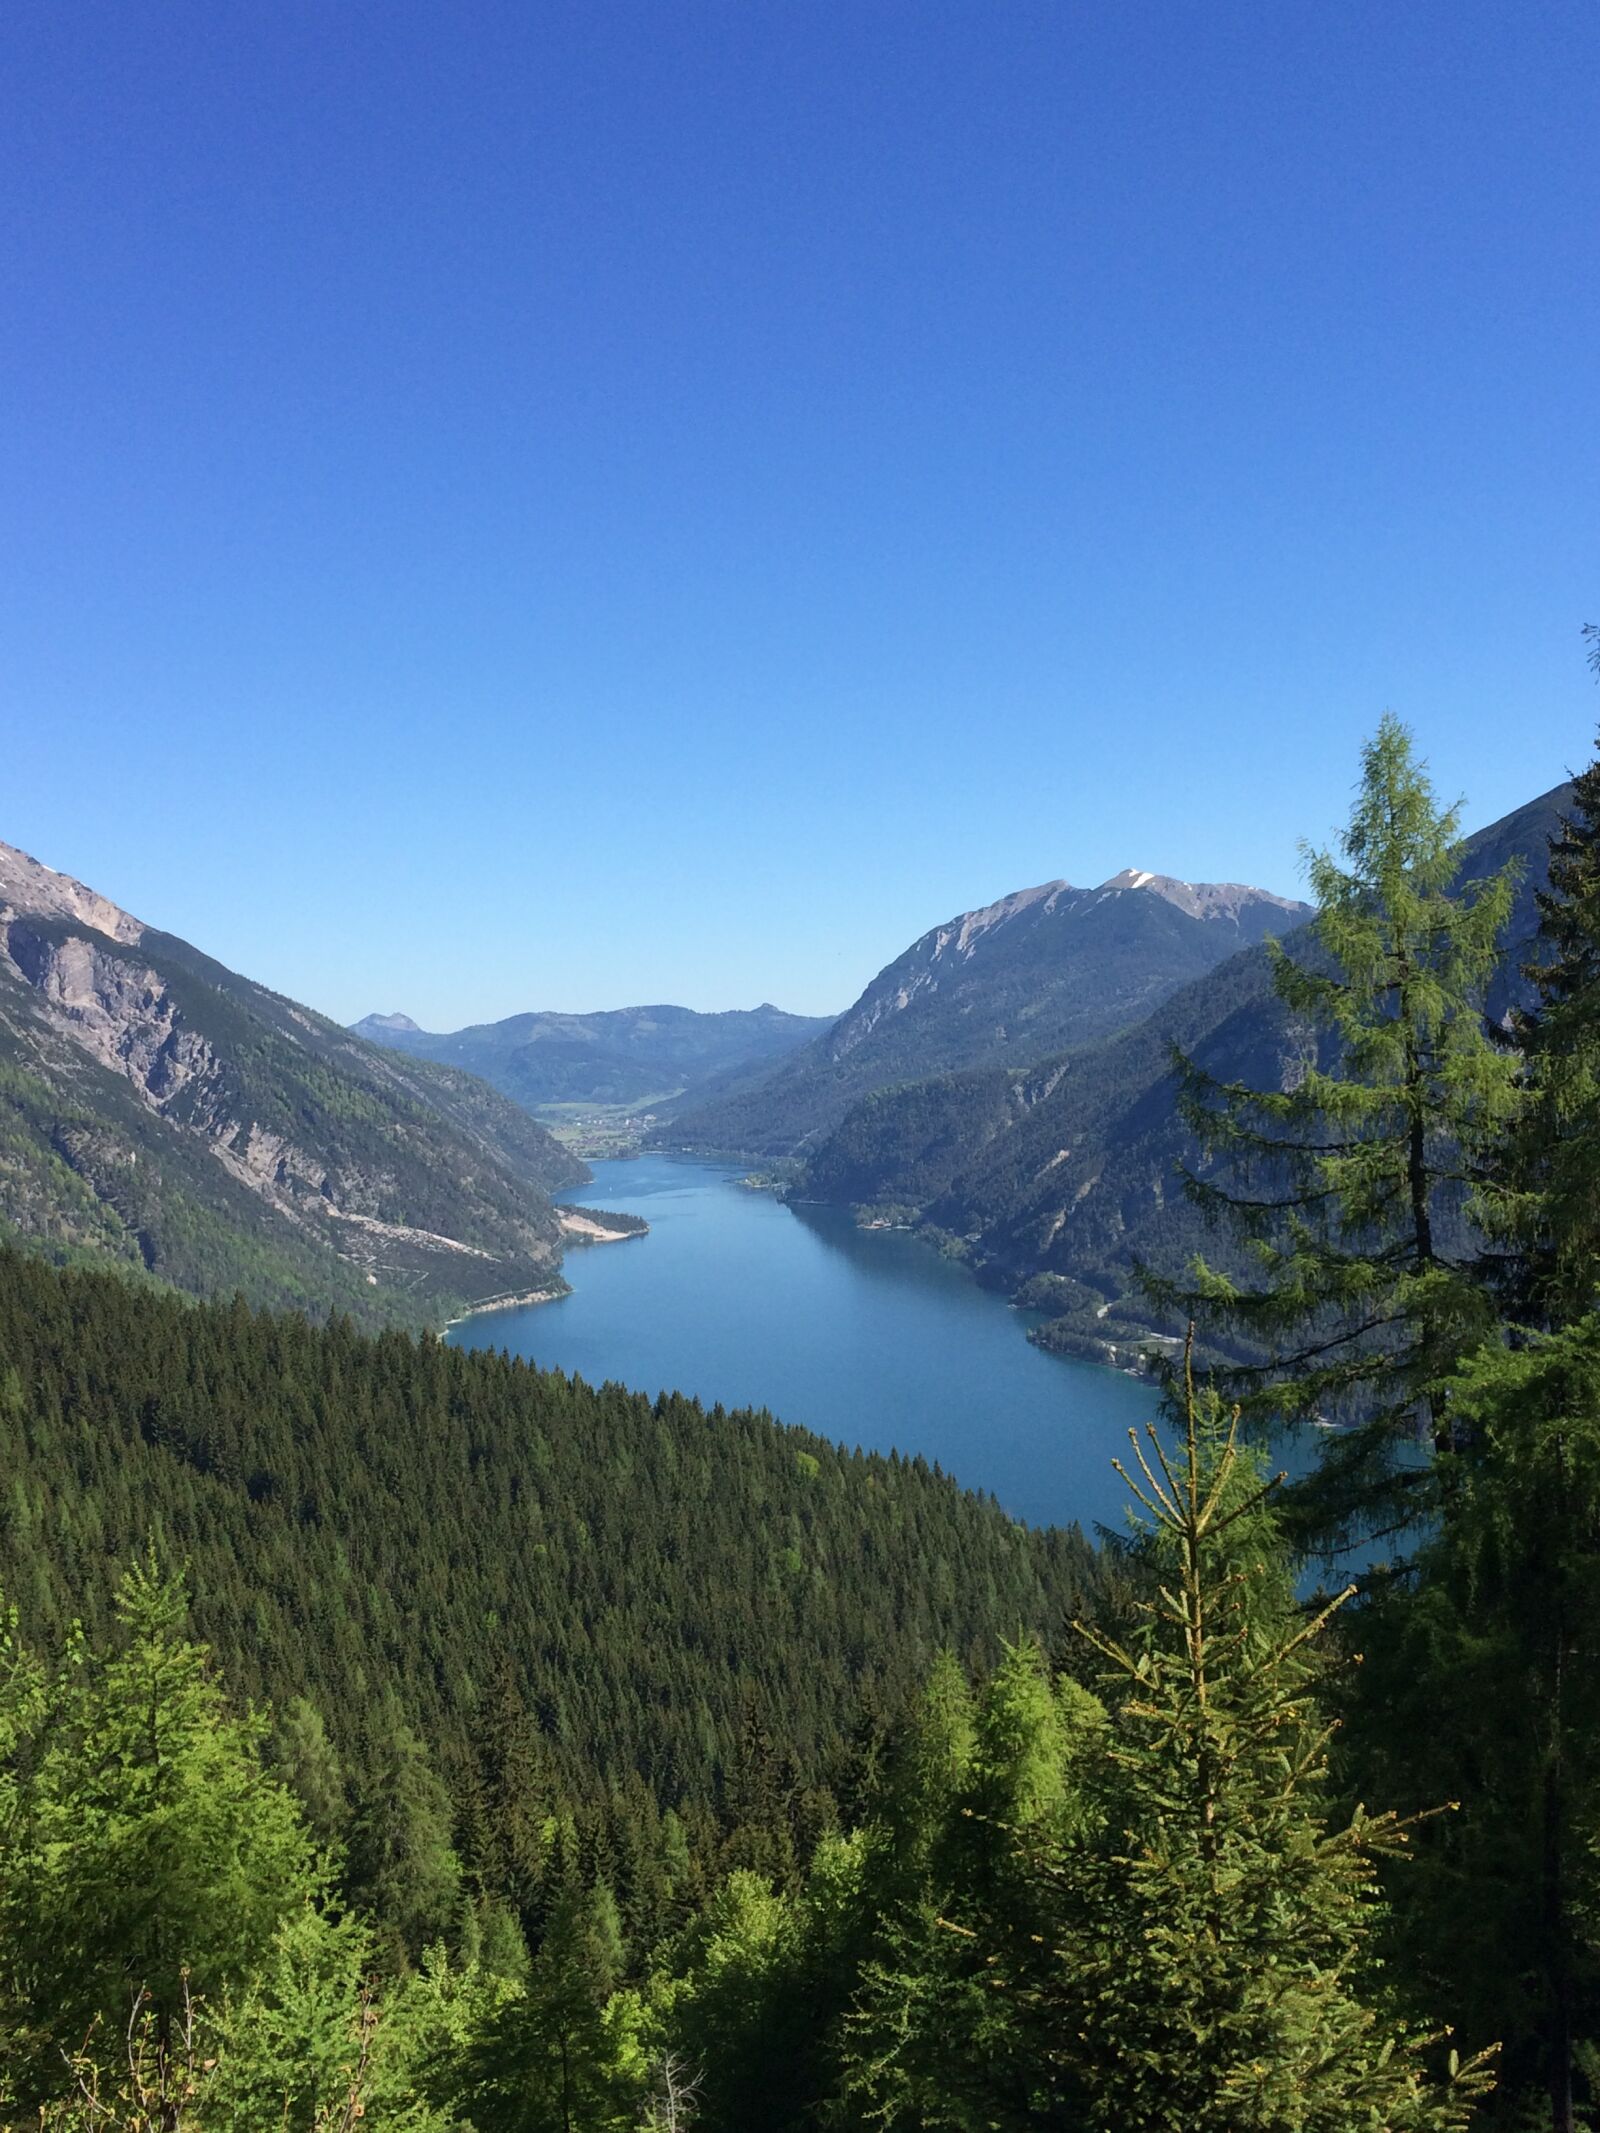 Apple iPhone 5s sample photo. Achensee, mountain, blue sky photography